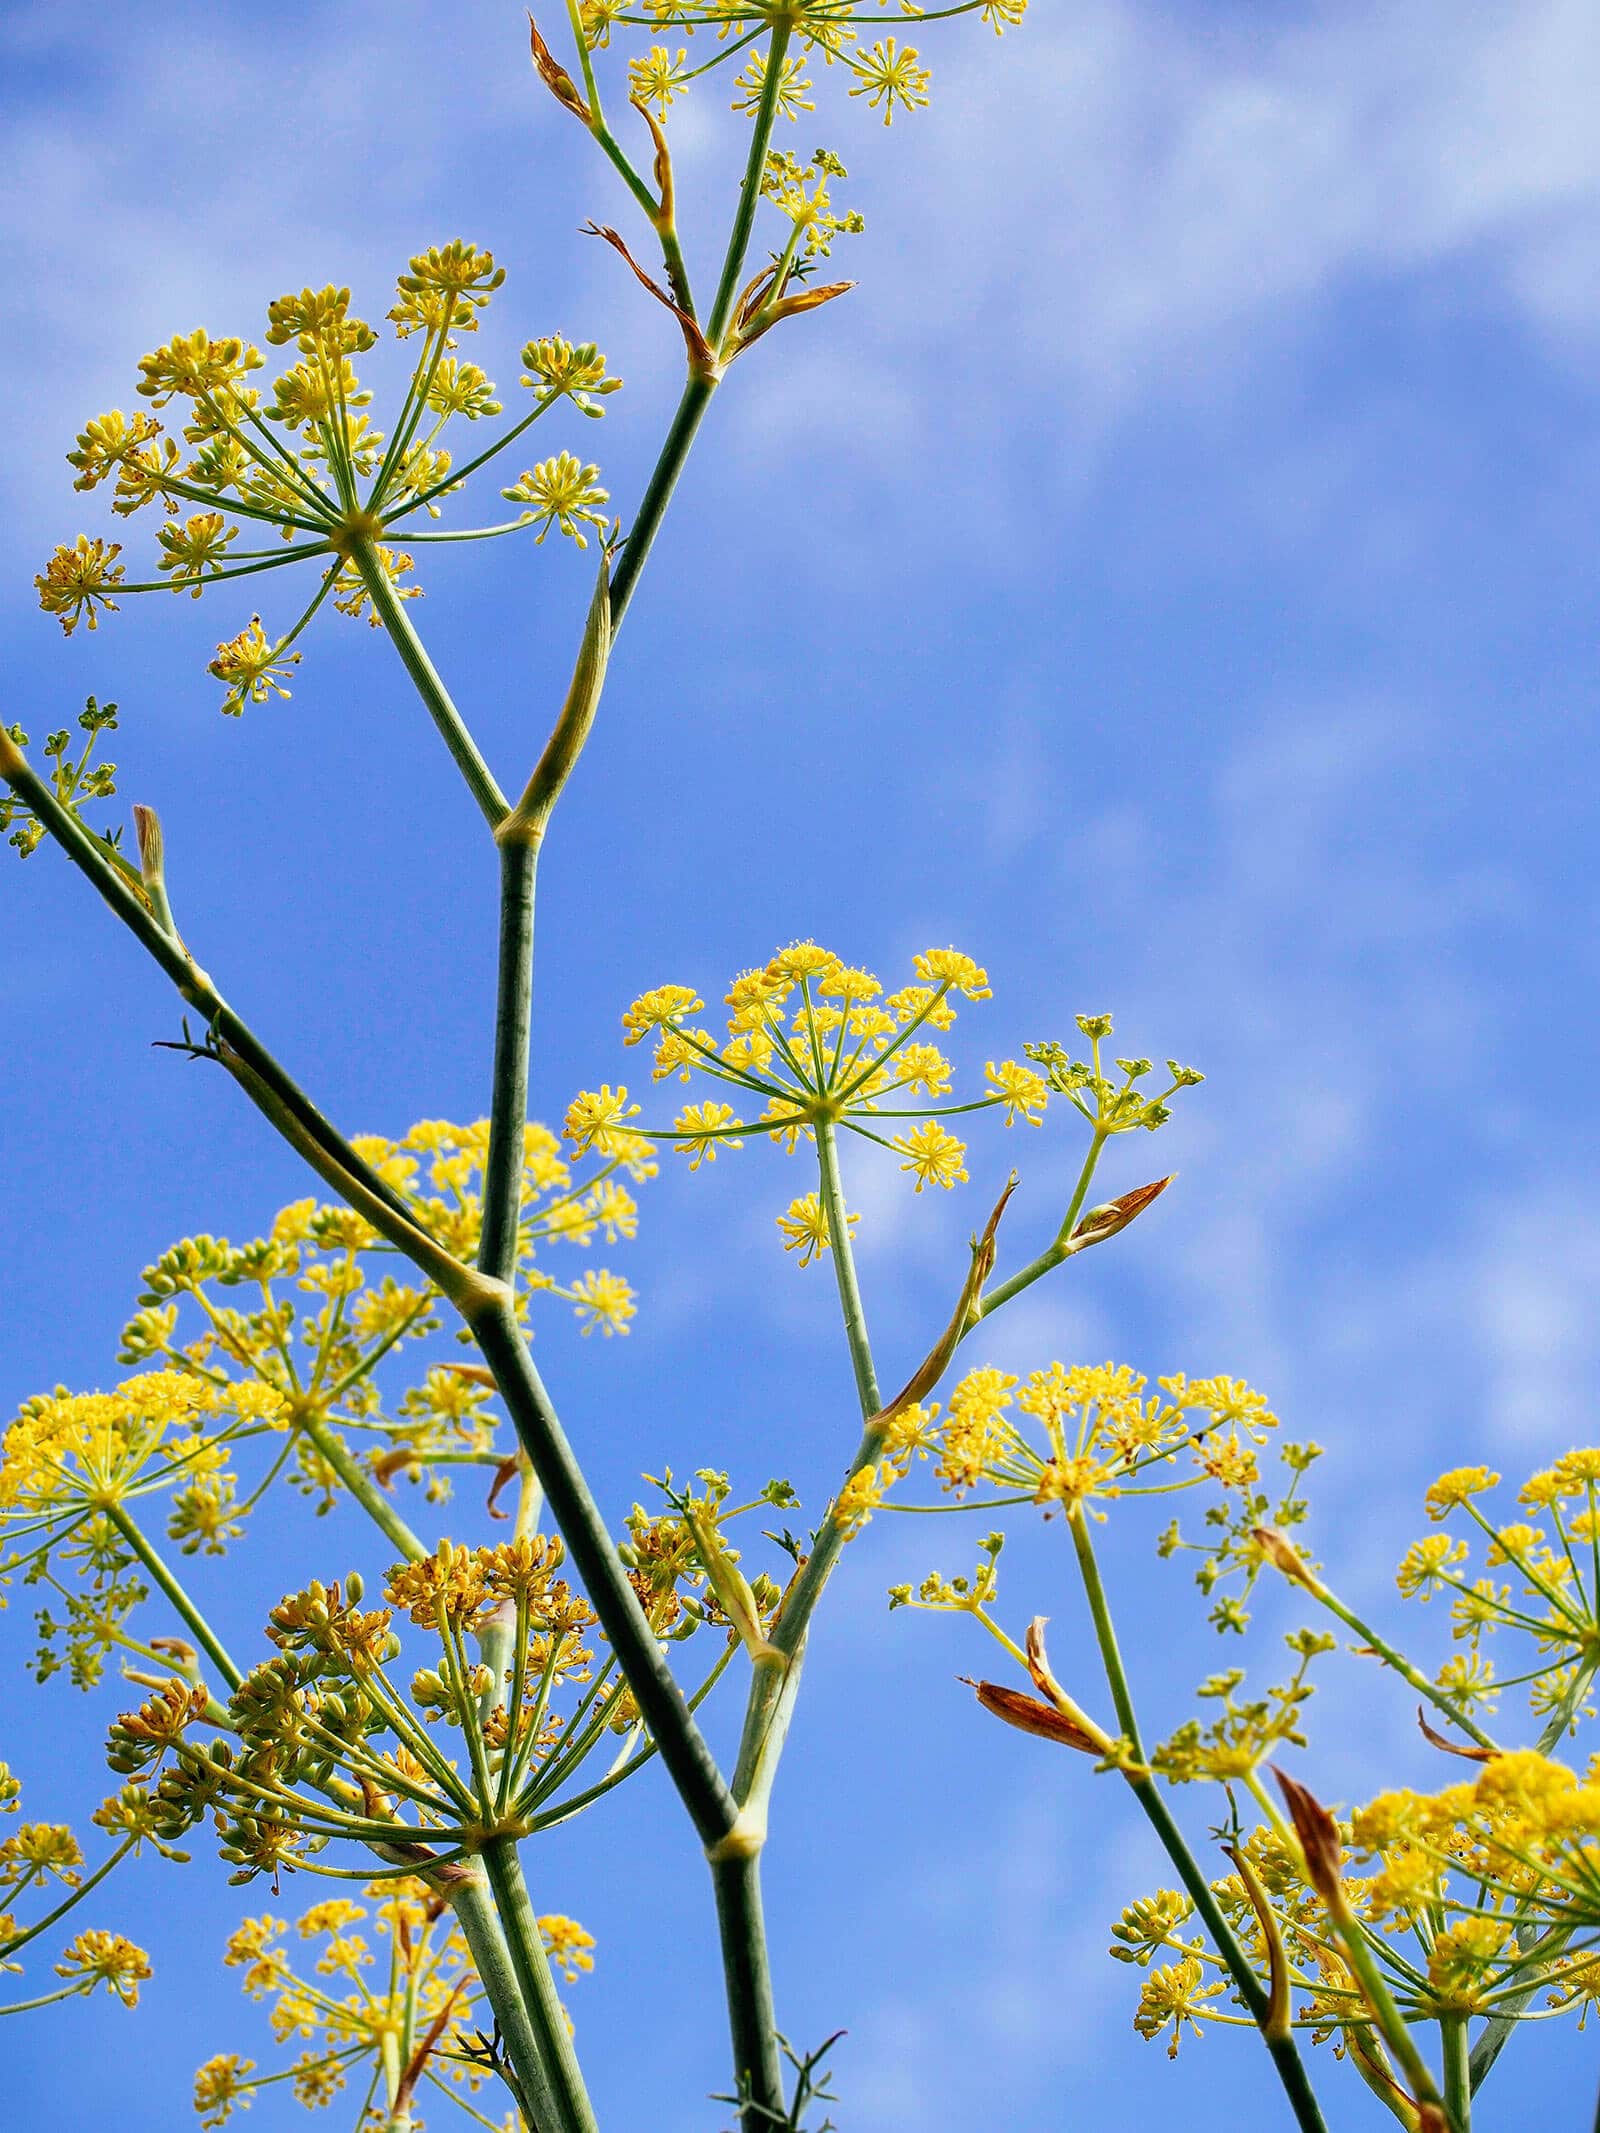 View of wild fennel from the ground up